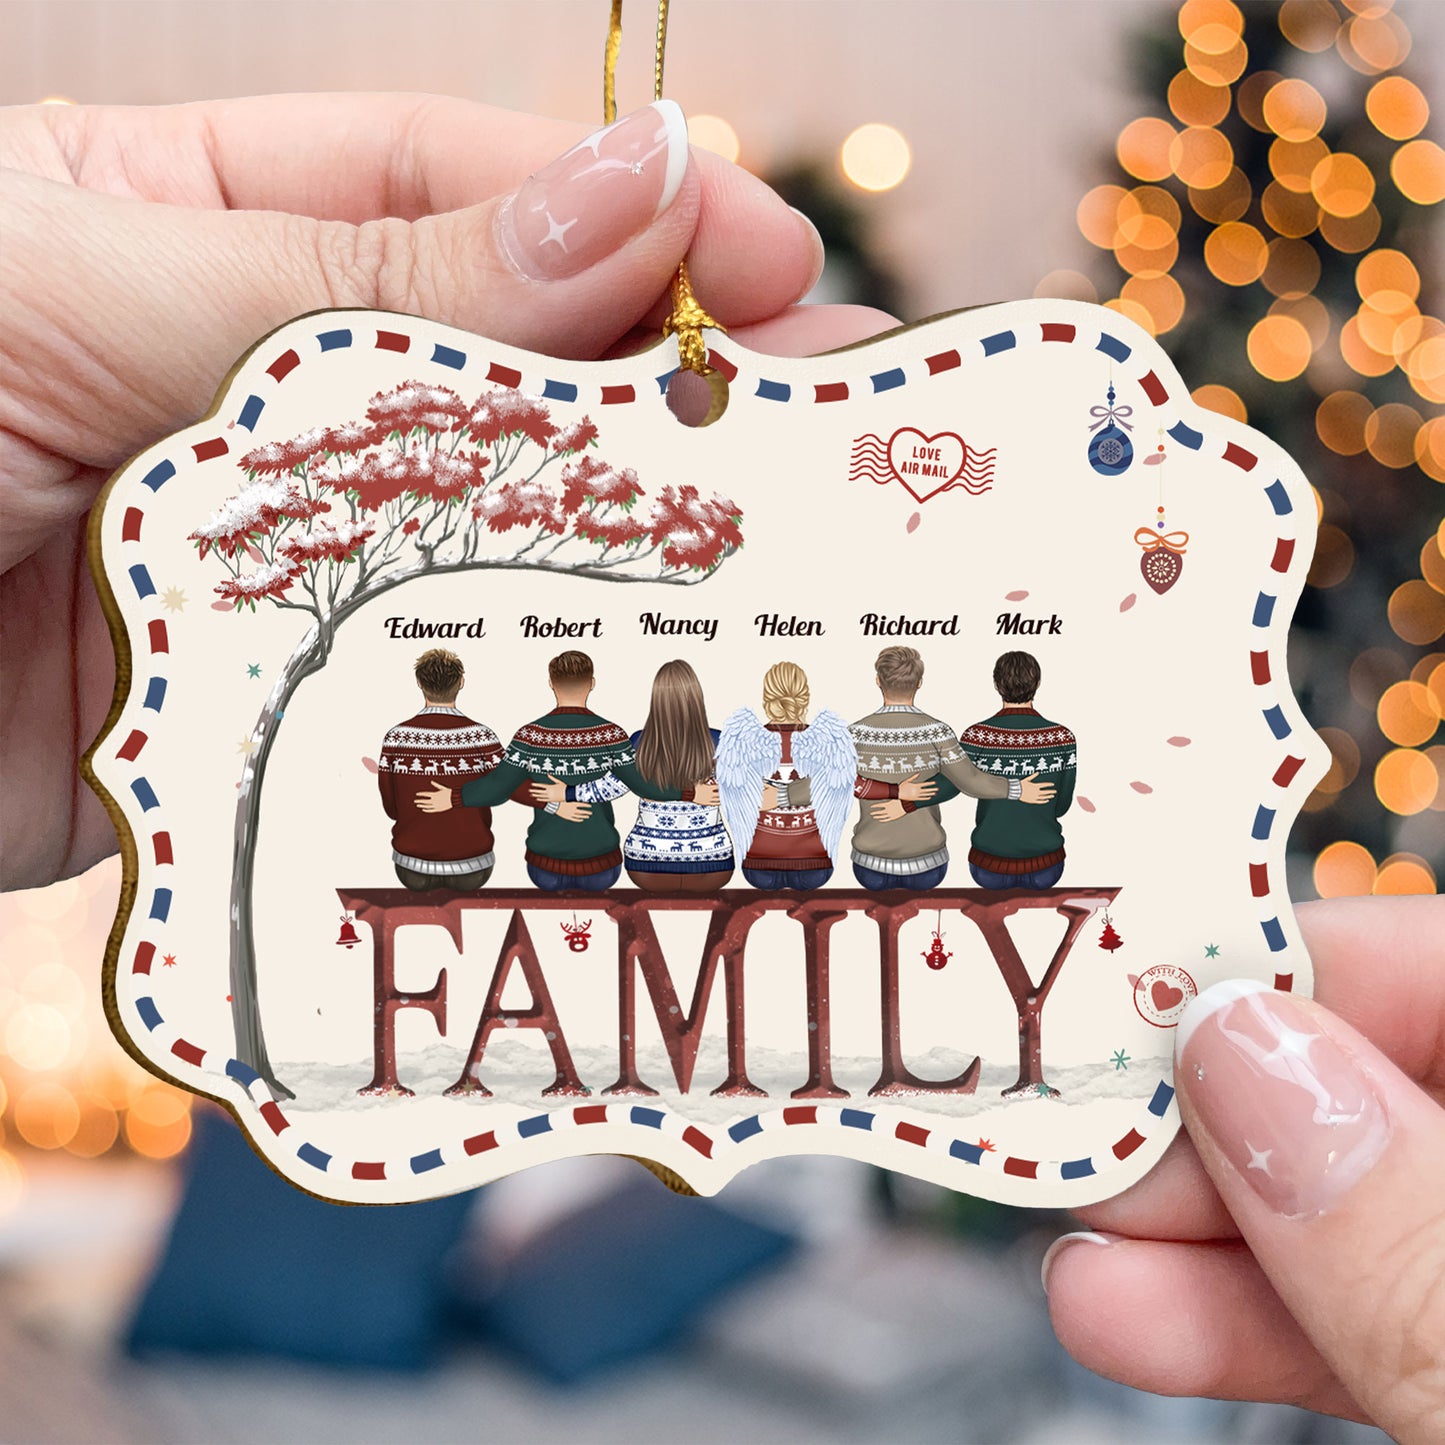 Always Brothers And Sisters - Personalized Christmas Wooden Card With Pop Out Ornament - Christmas Gift For Brothers, Sisters